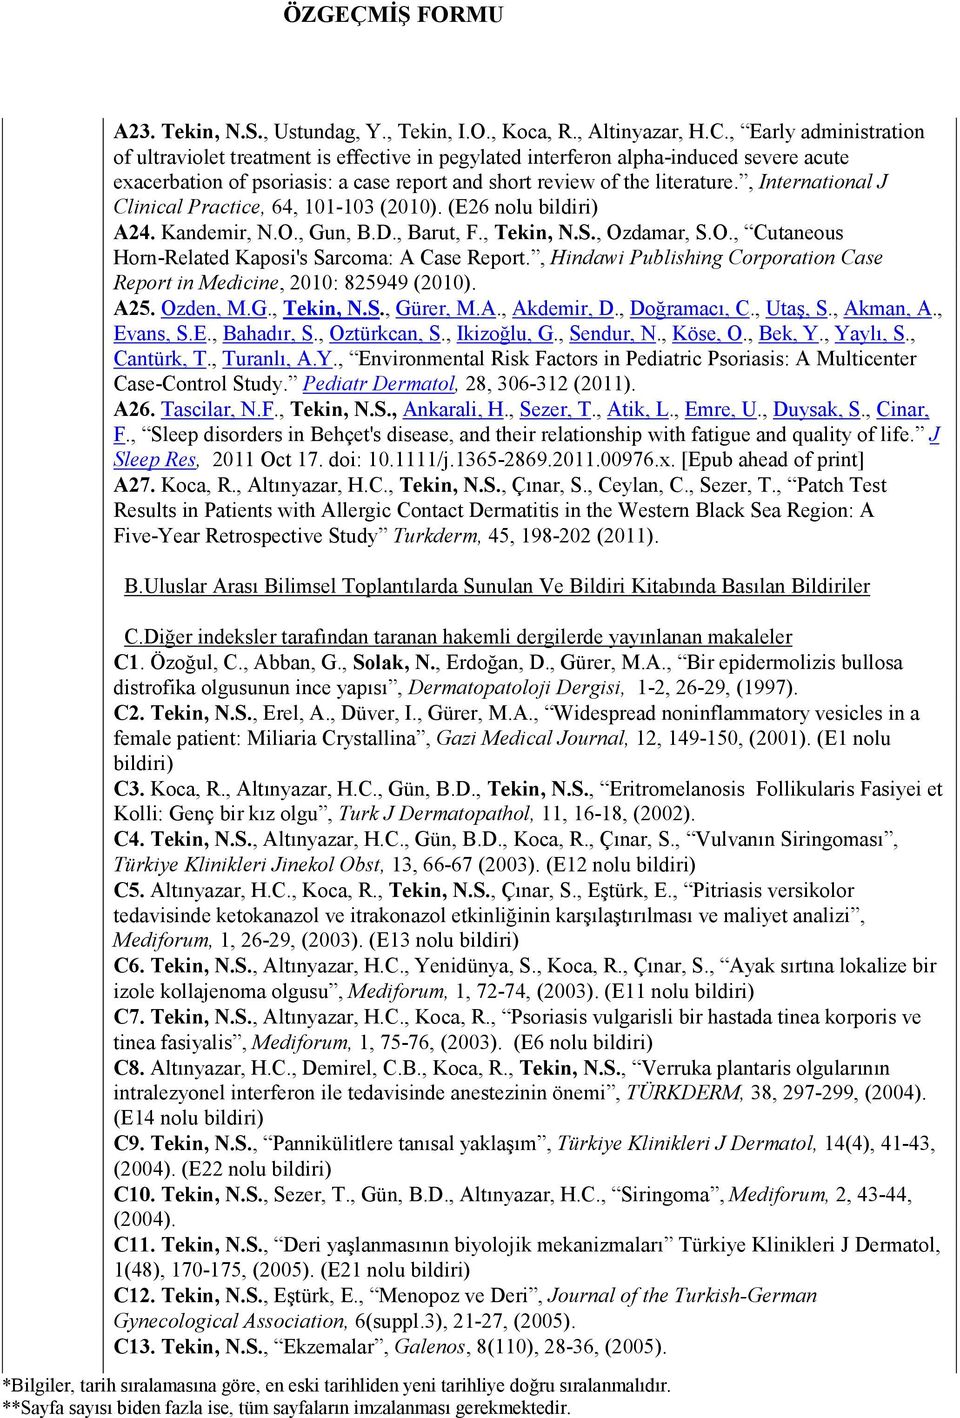 , International J Clinical Practice, 64, 101-103 (2010). (E26 nolu A24. Kandemir, N.O., Gun, B.D., Barut, F., Tekin, N.S., Ozdamar, S.O., Cutaneous Horn-Related Kaposi's Sarcoma: A Case Report.